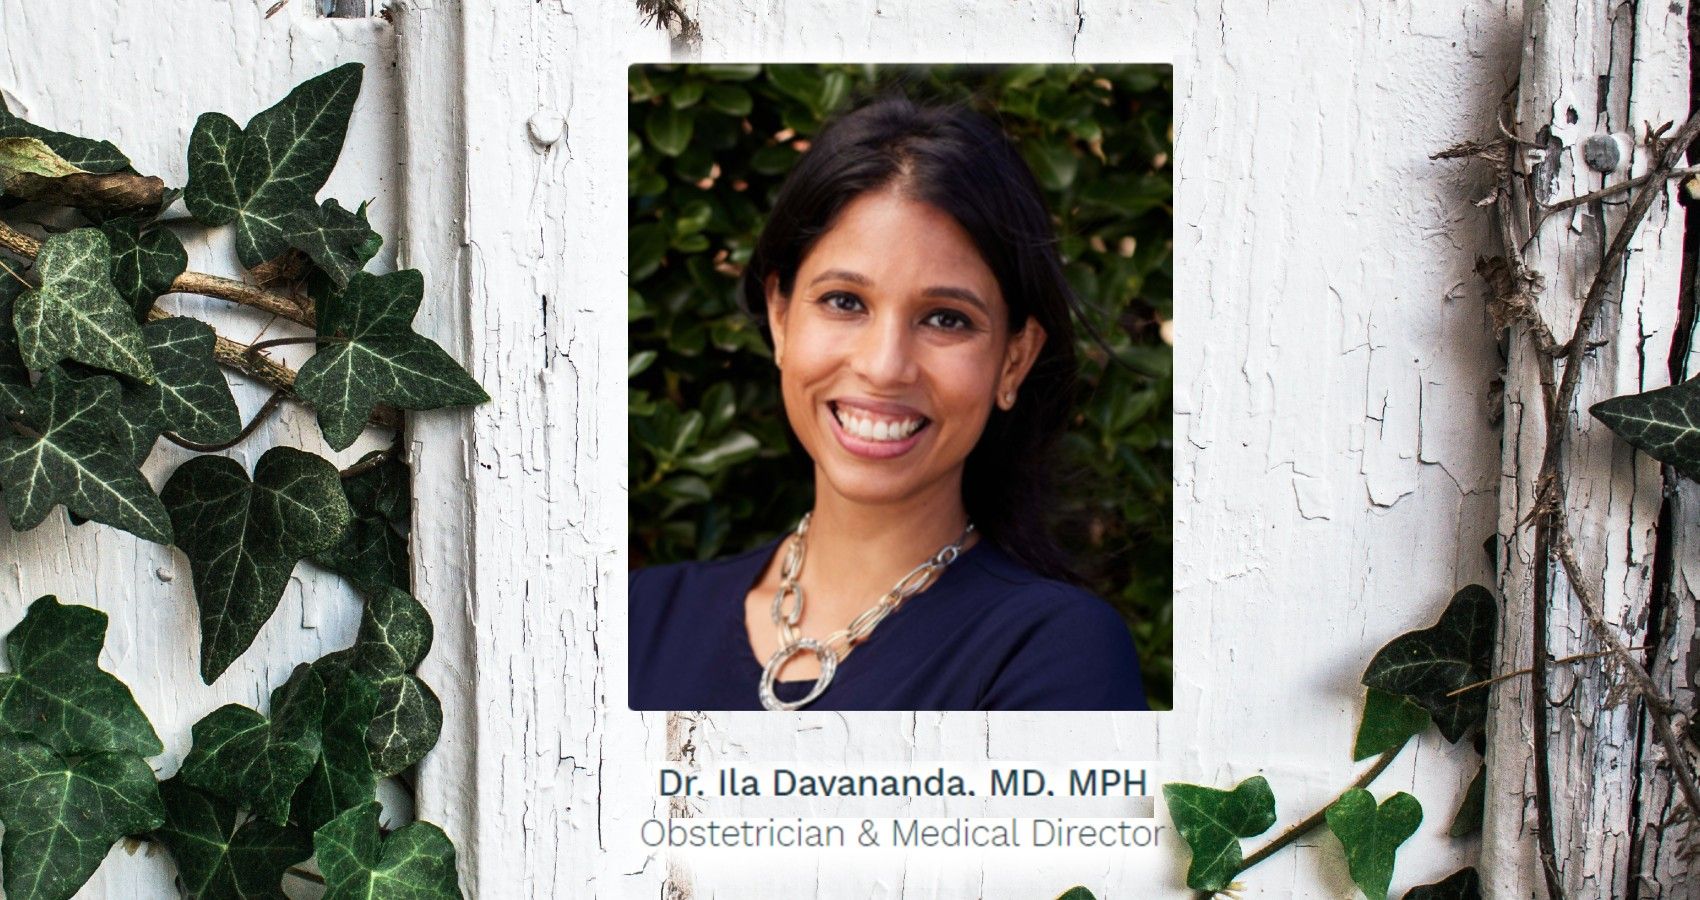 Interview With Dr. Ila Dayananda On Navigating Pregnancy During COVID